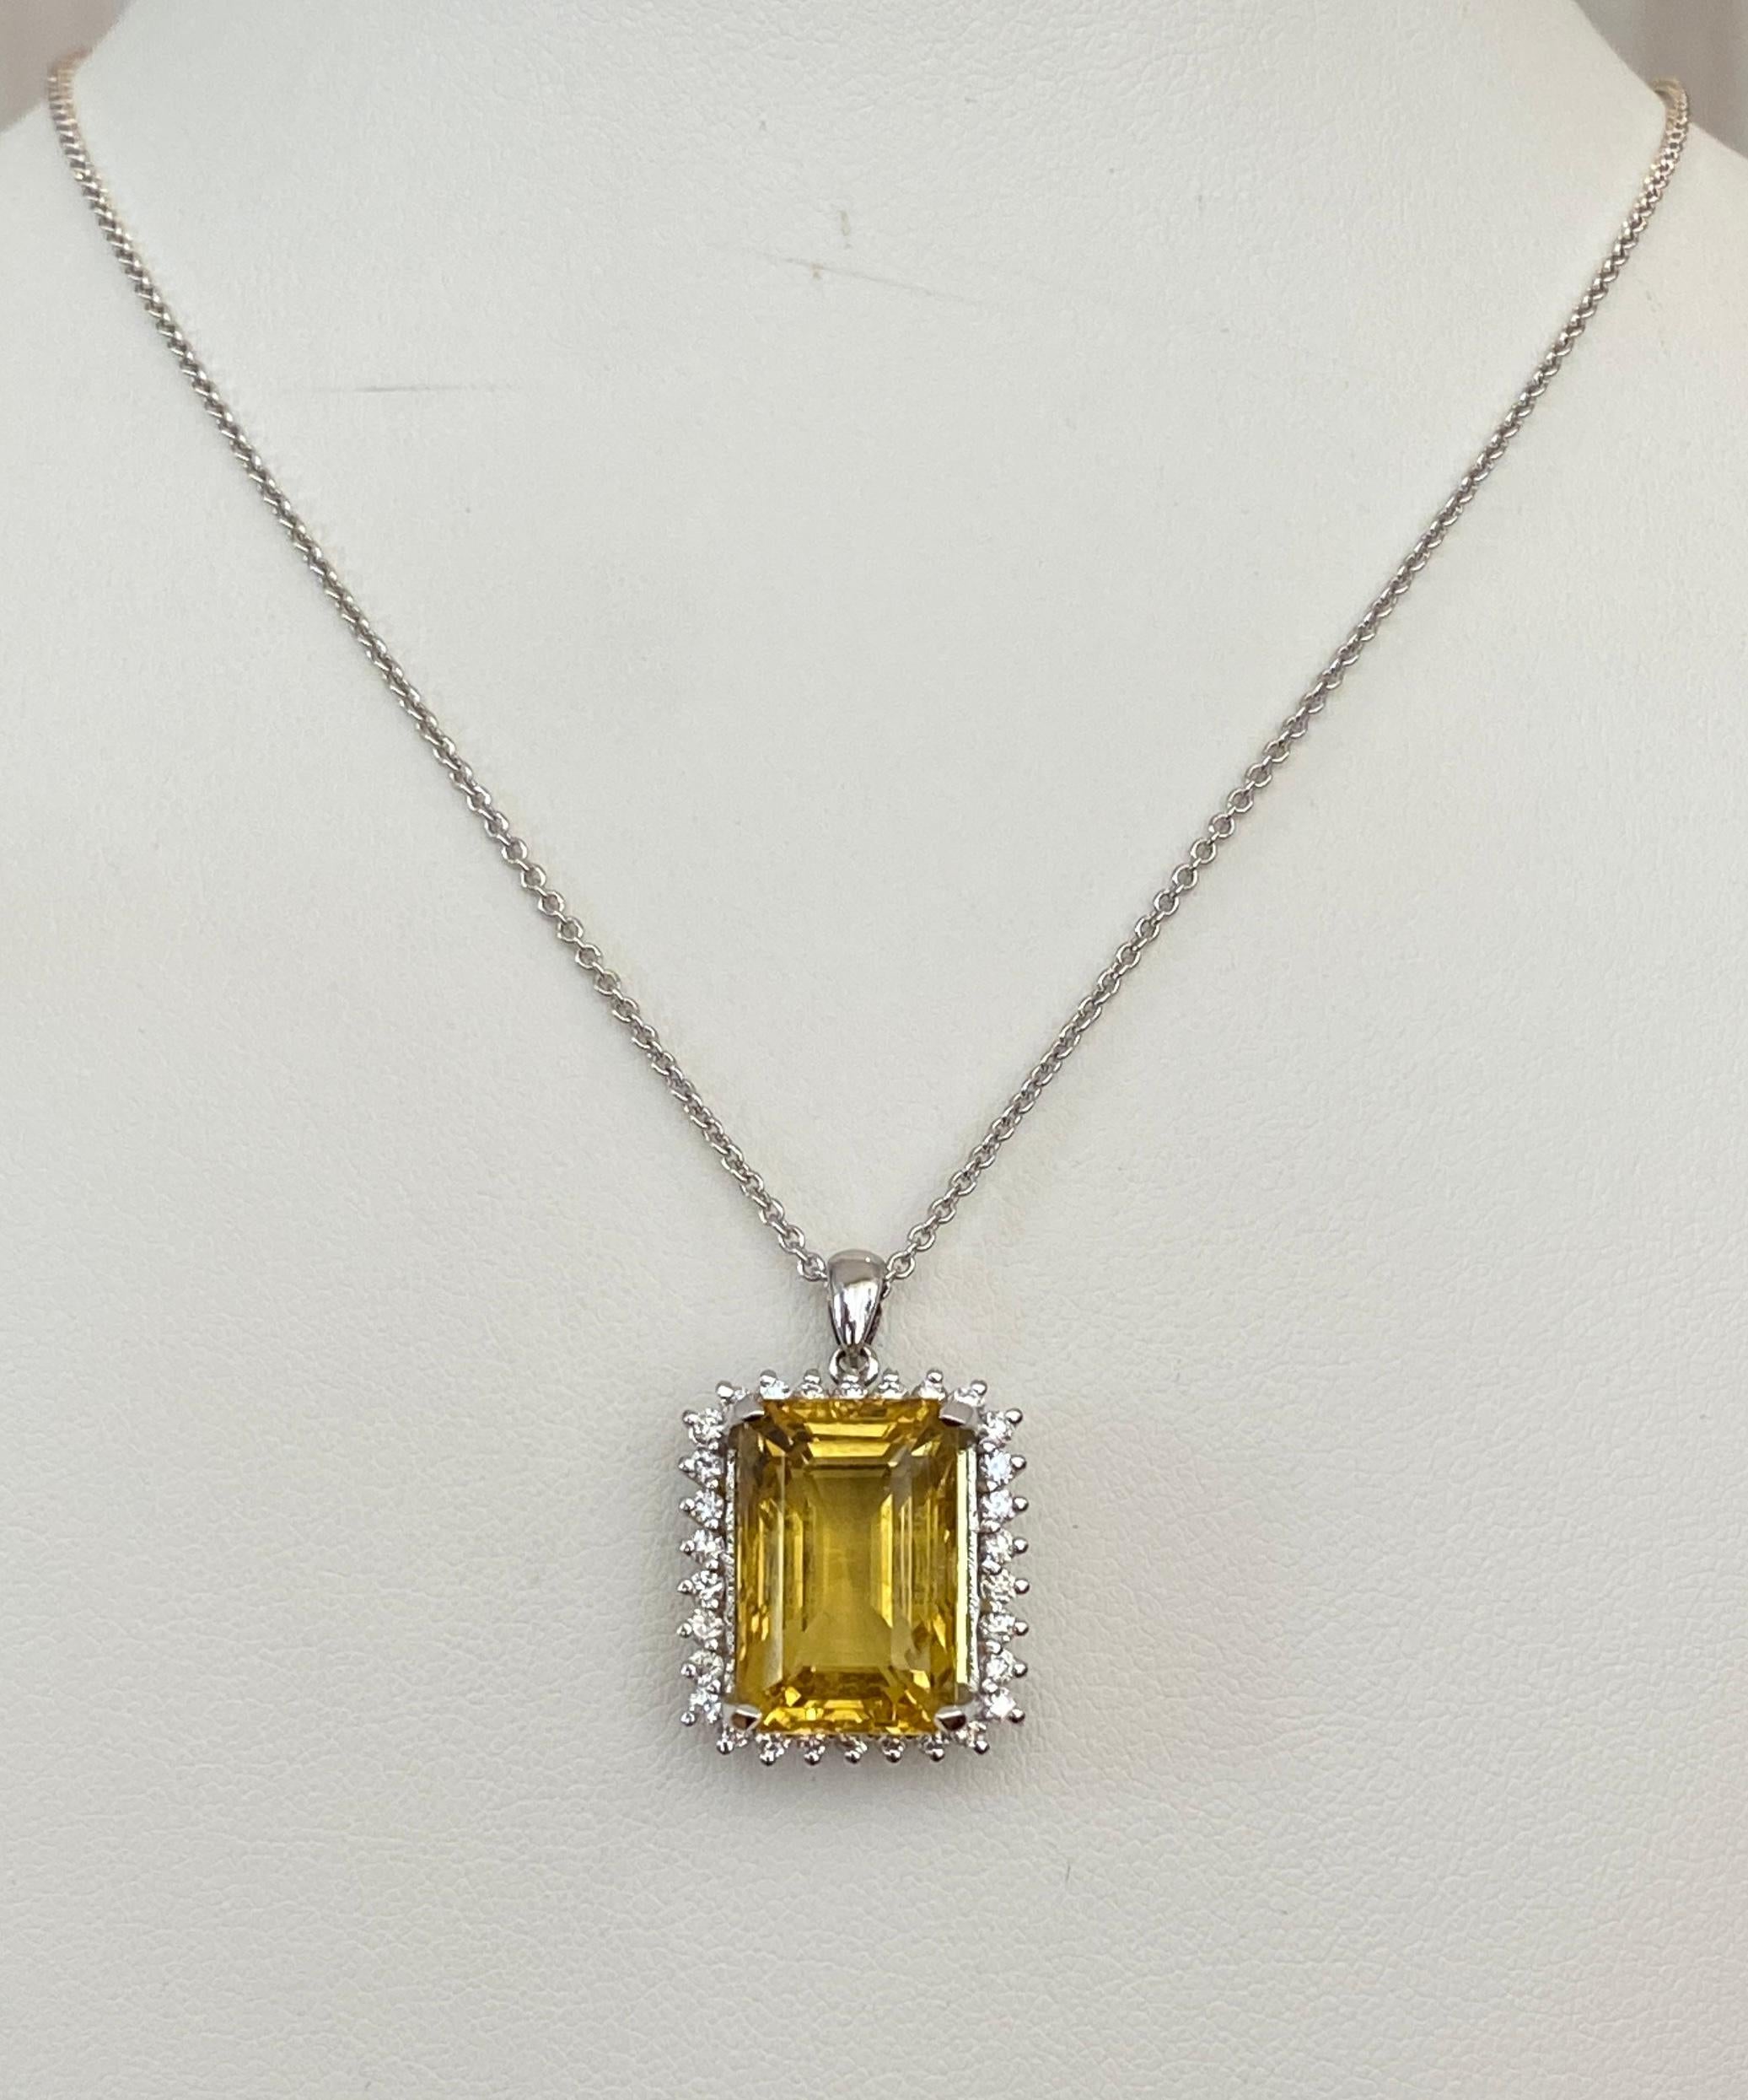 Emerald Cut 18 Karat White Gold Necklace with a Diamond Pendant Decorated with Citrine